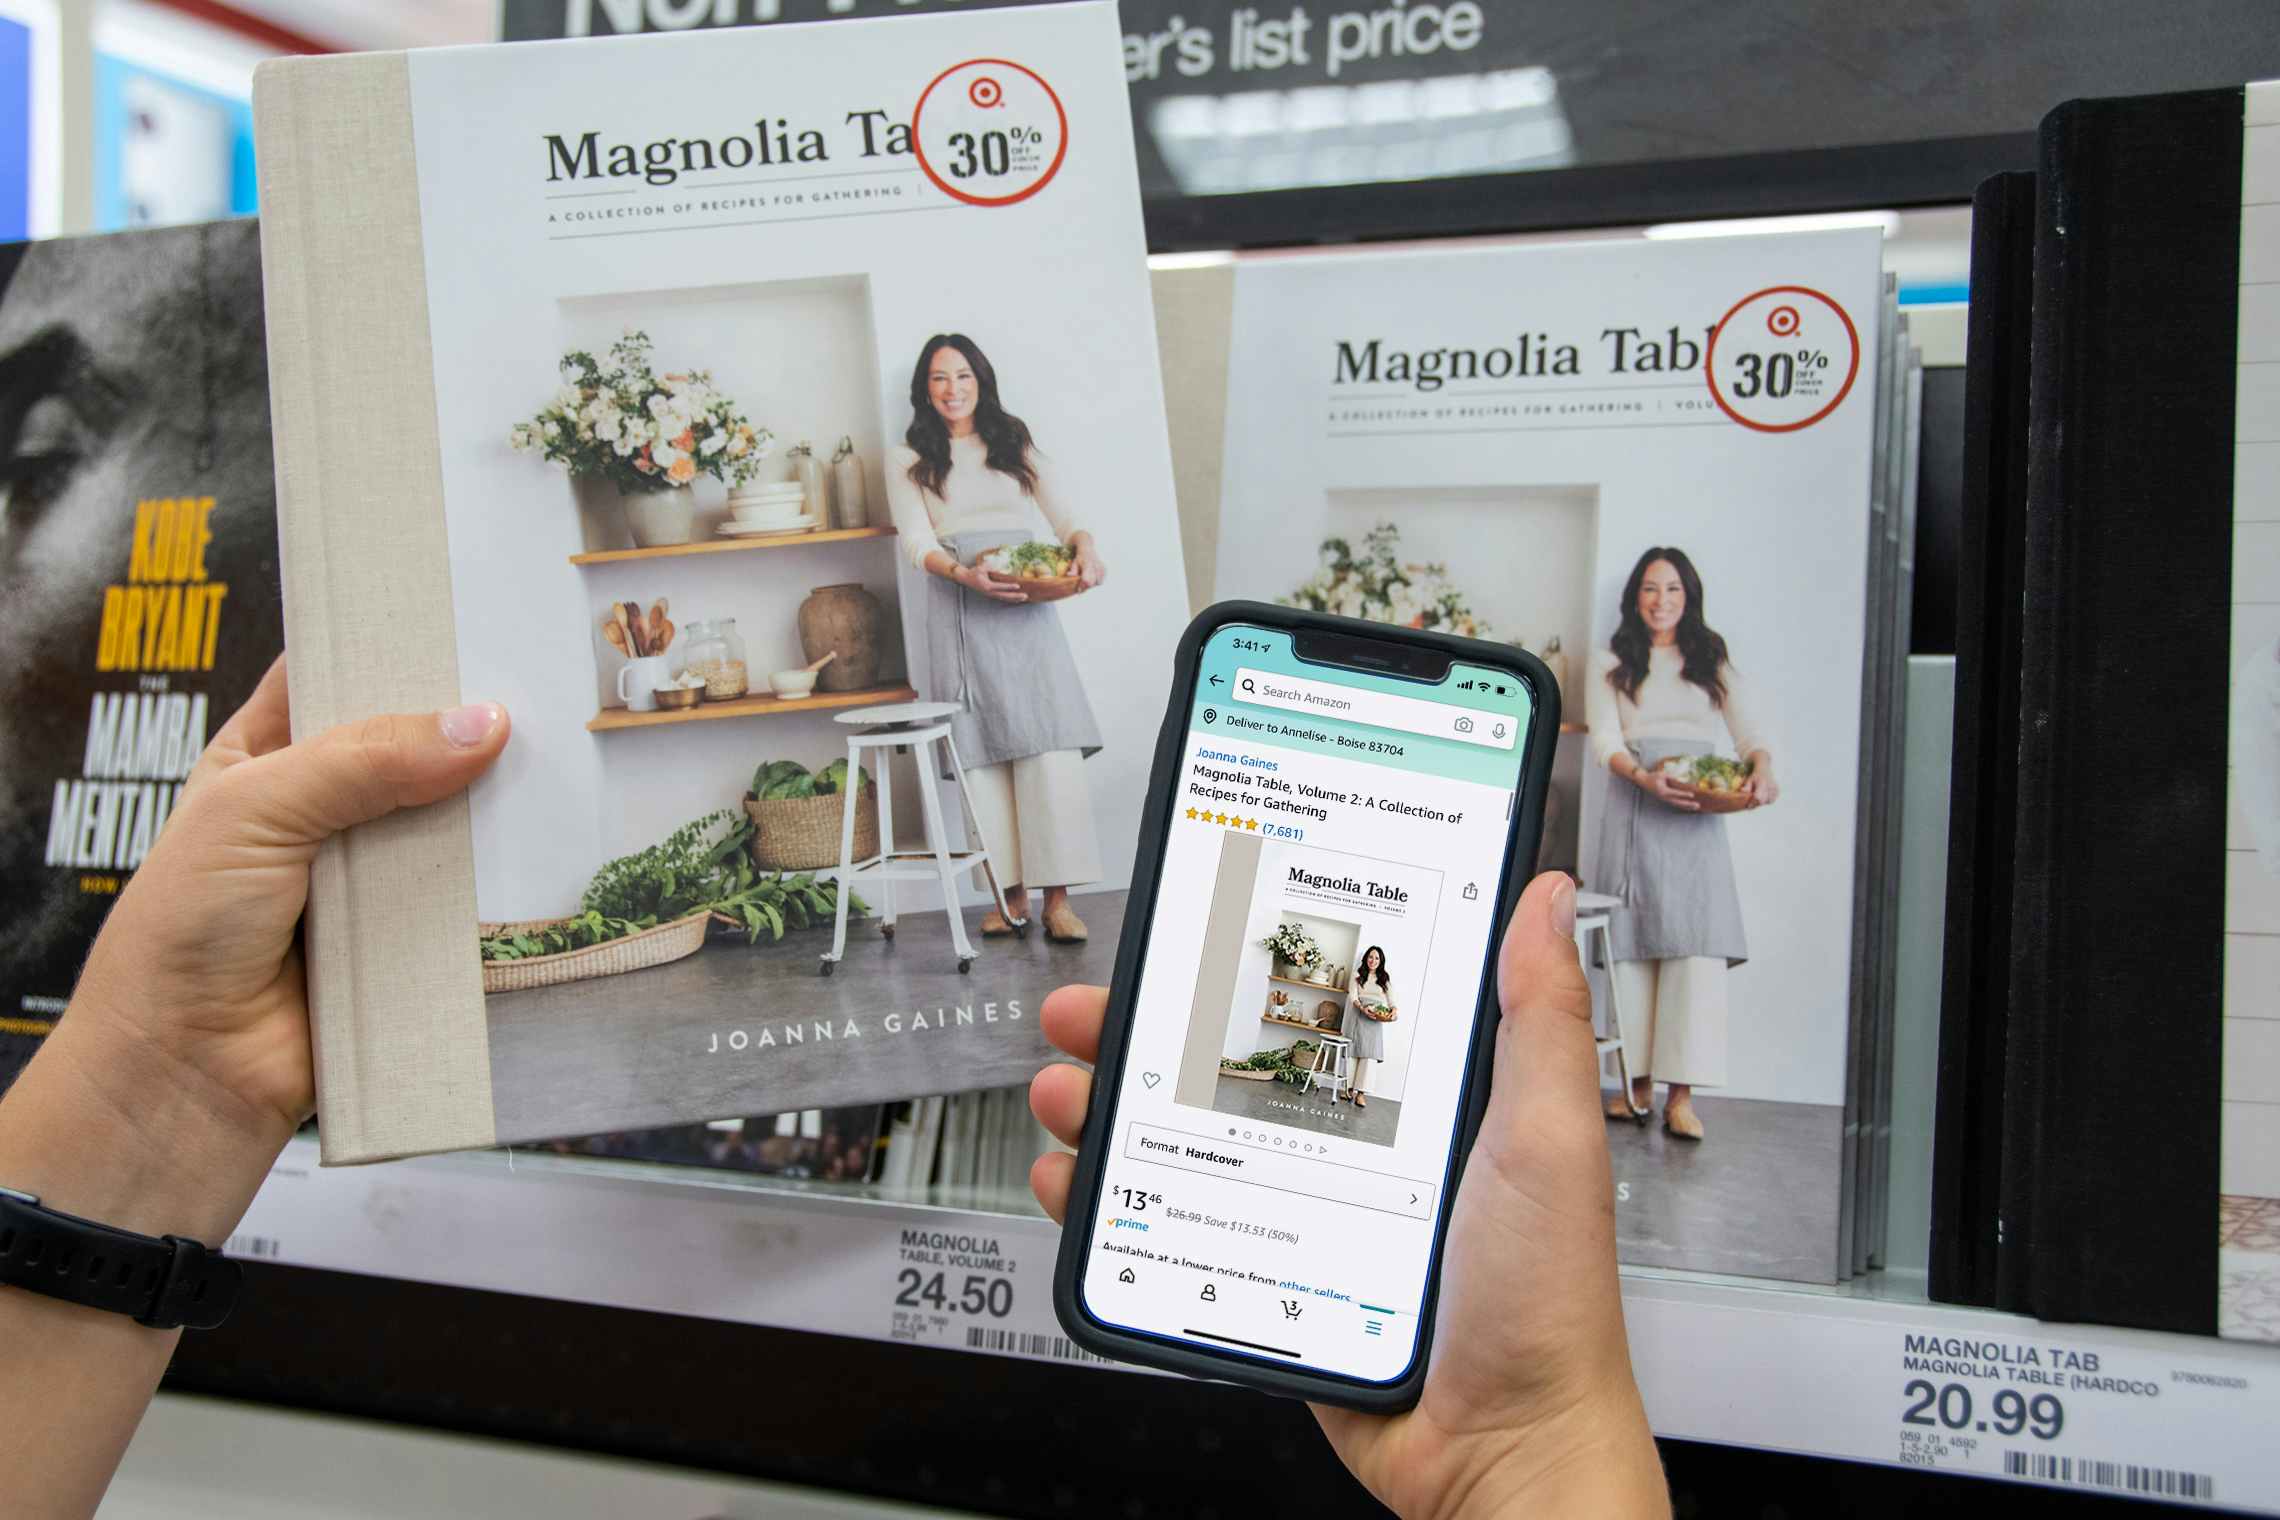 A copy of Magnolia Table held next to a cell phone displaying a lower price on the Amazon app.